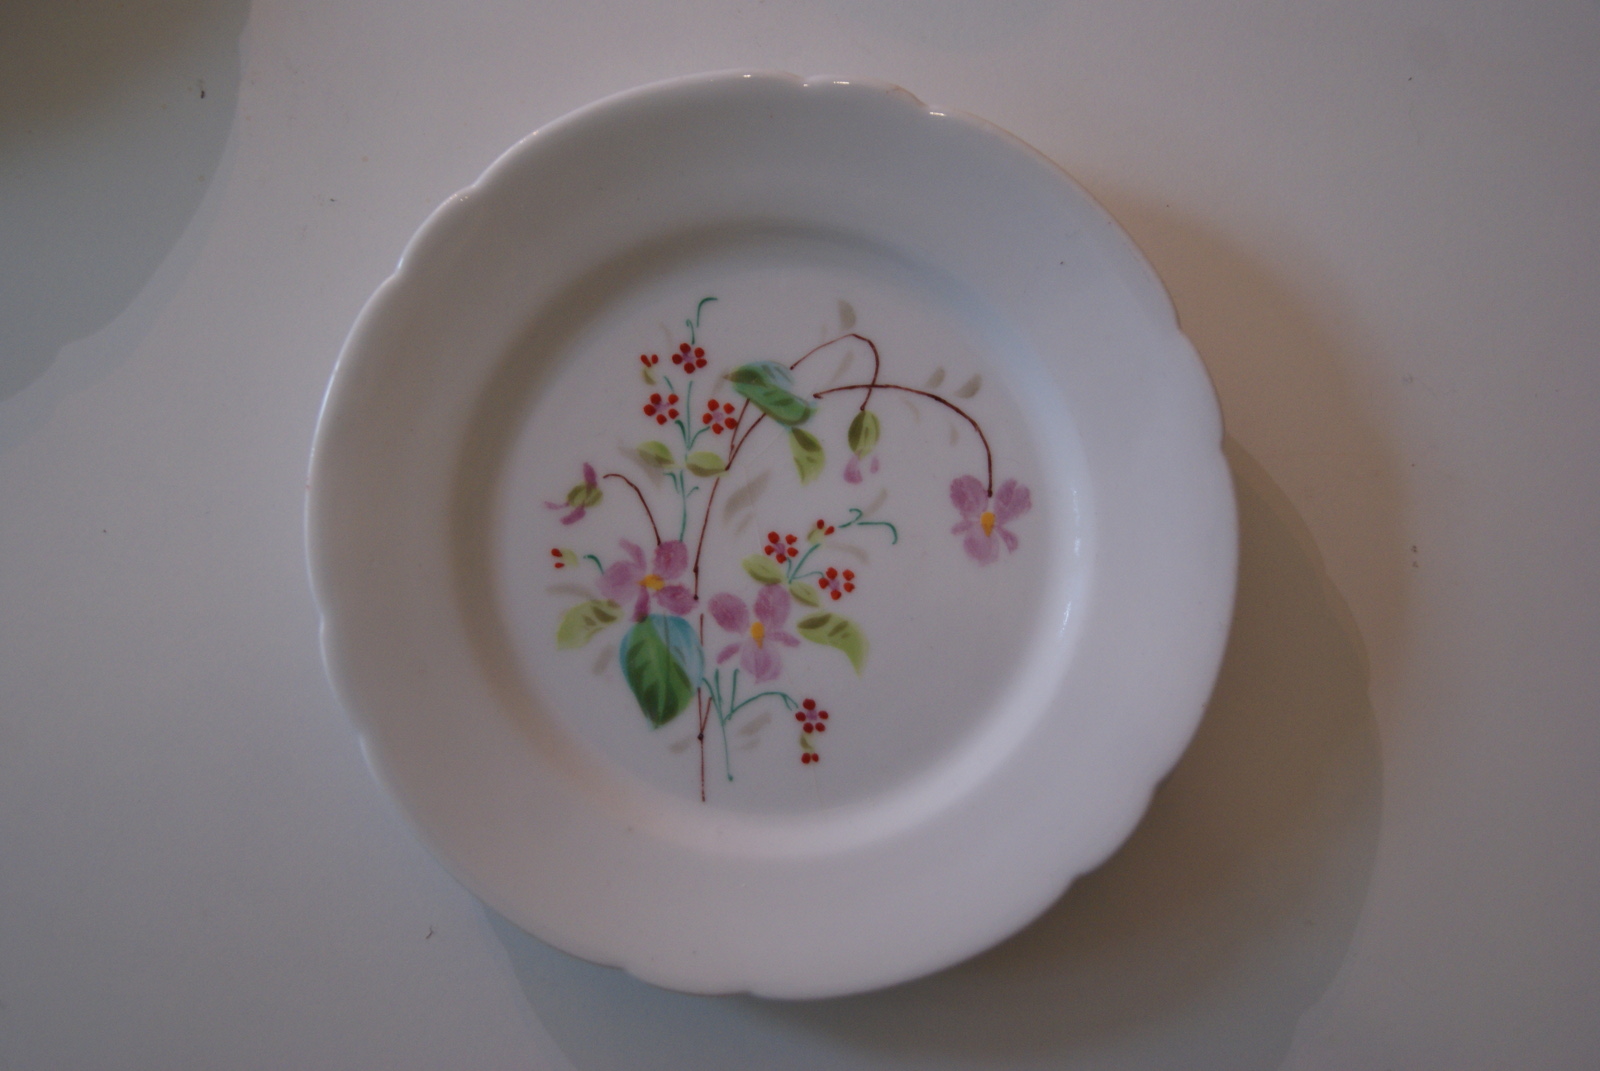 Fraureuth plate with flowers, pink and red flowers with leaves